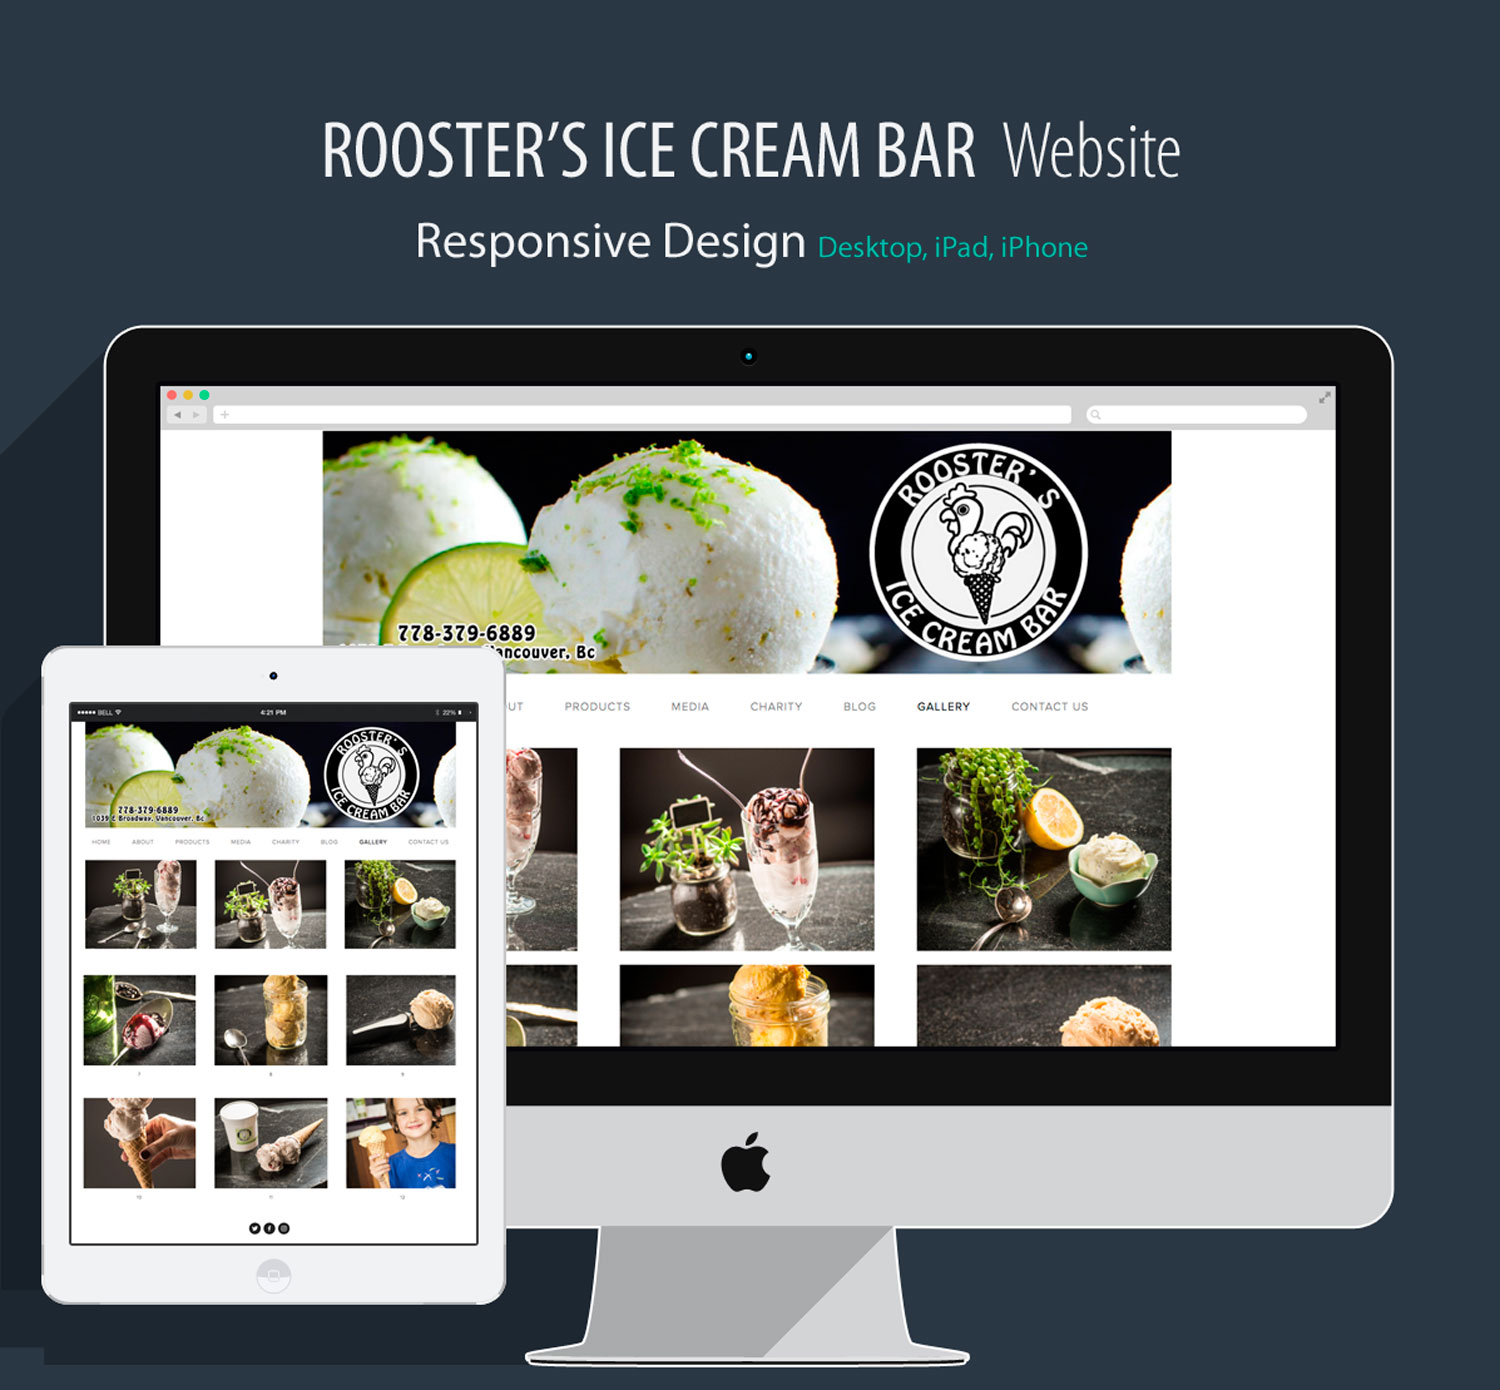 Roosters Ice Cream Bar